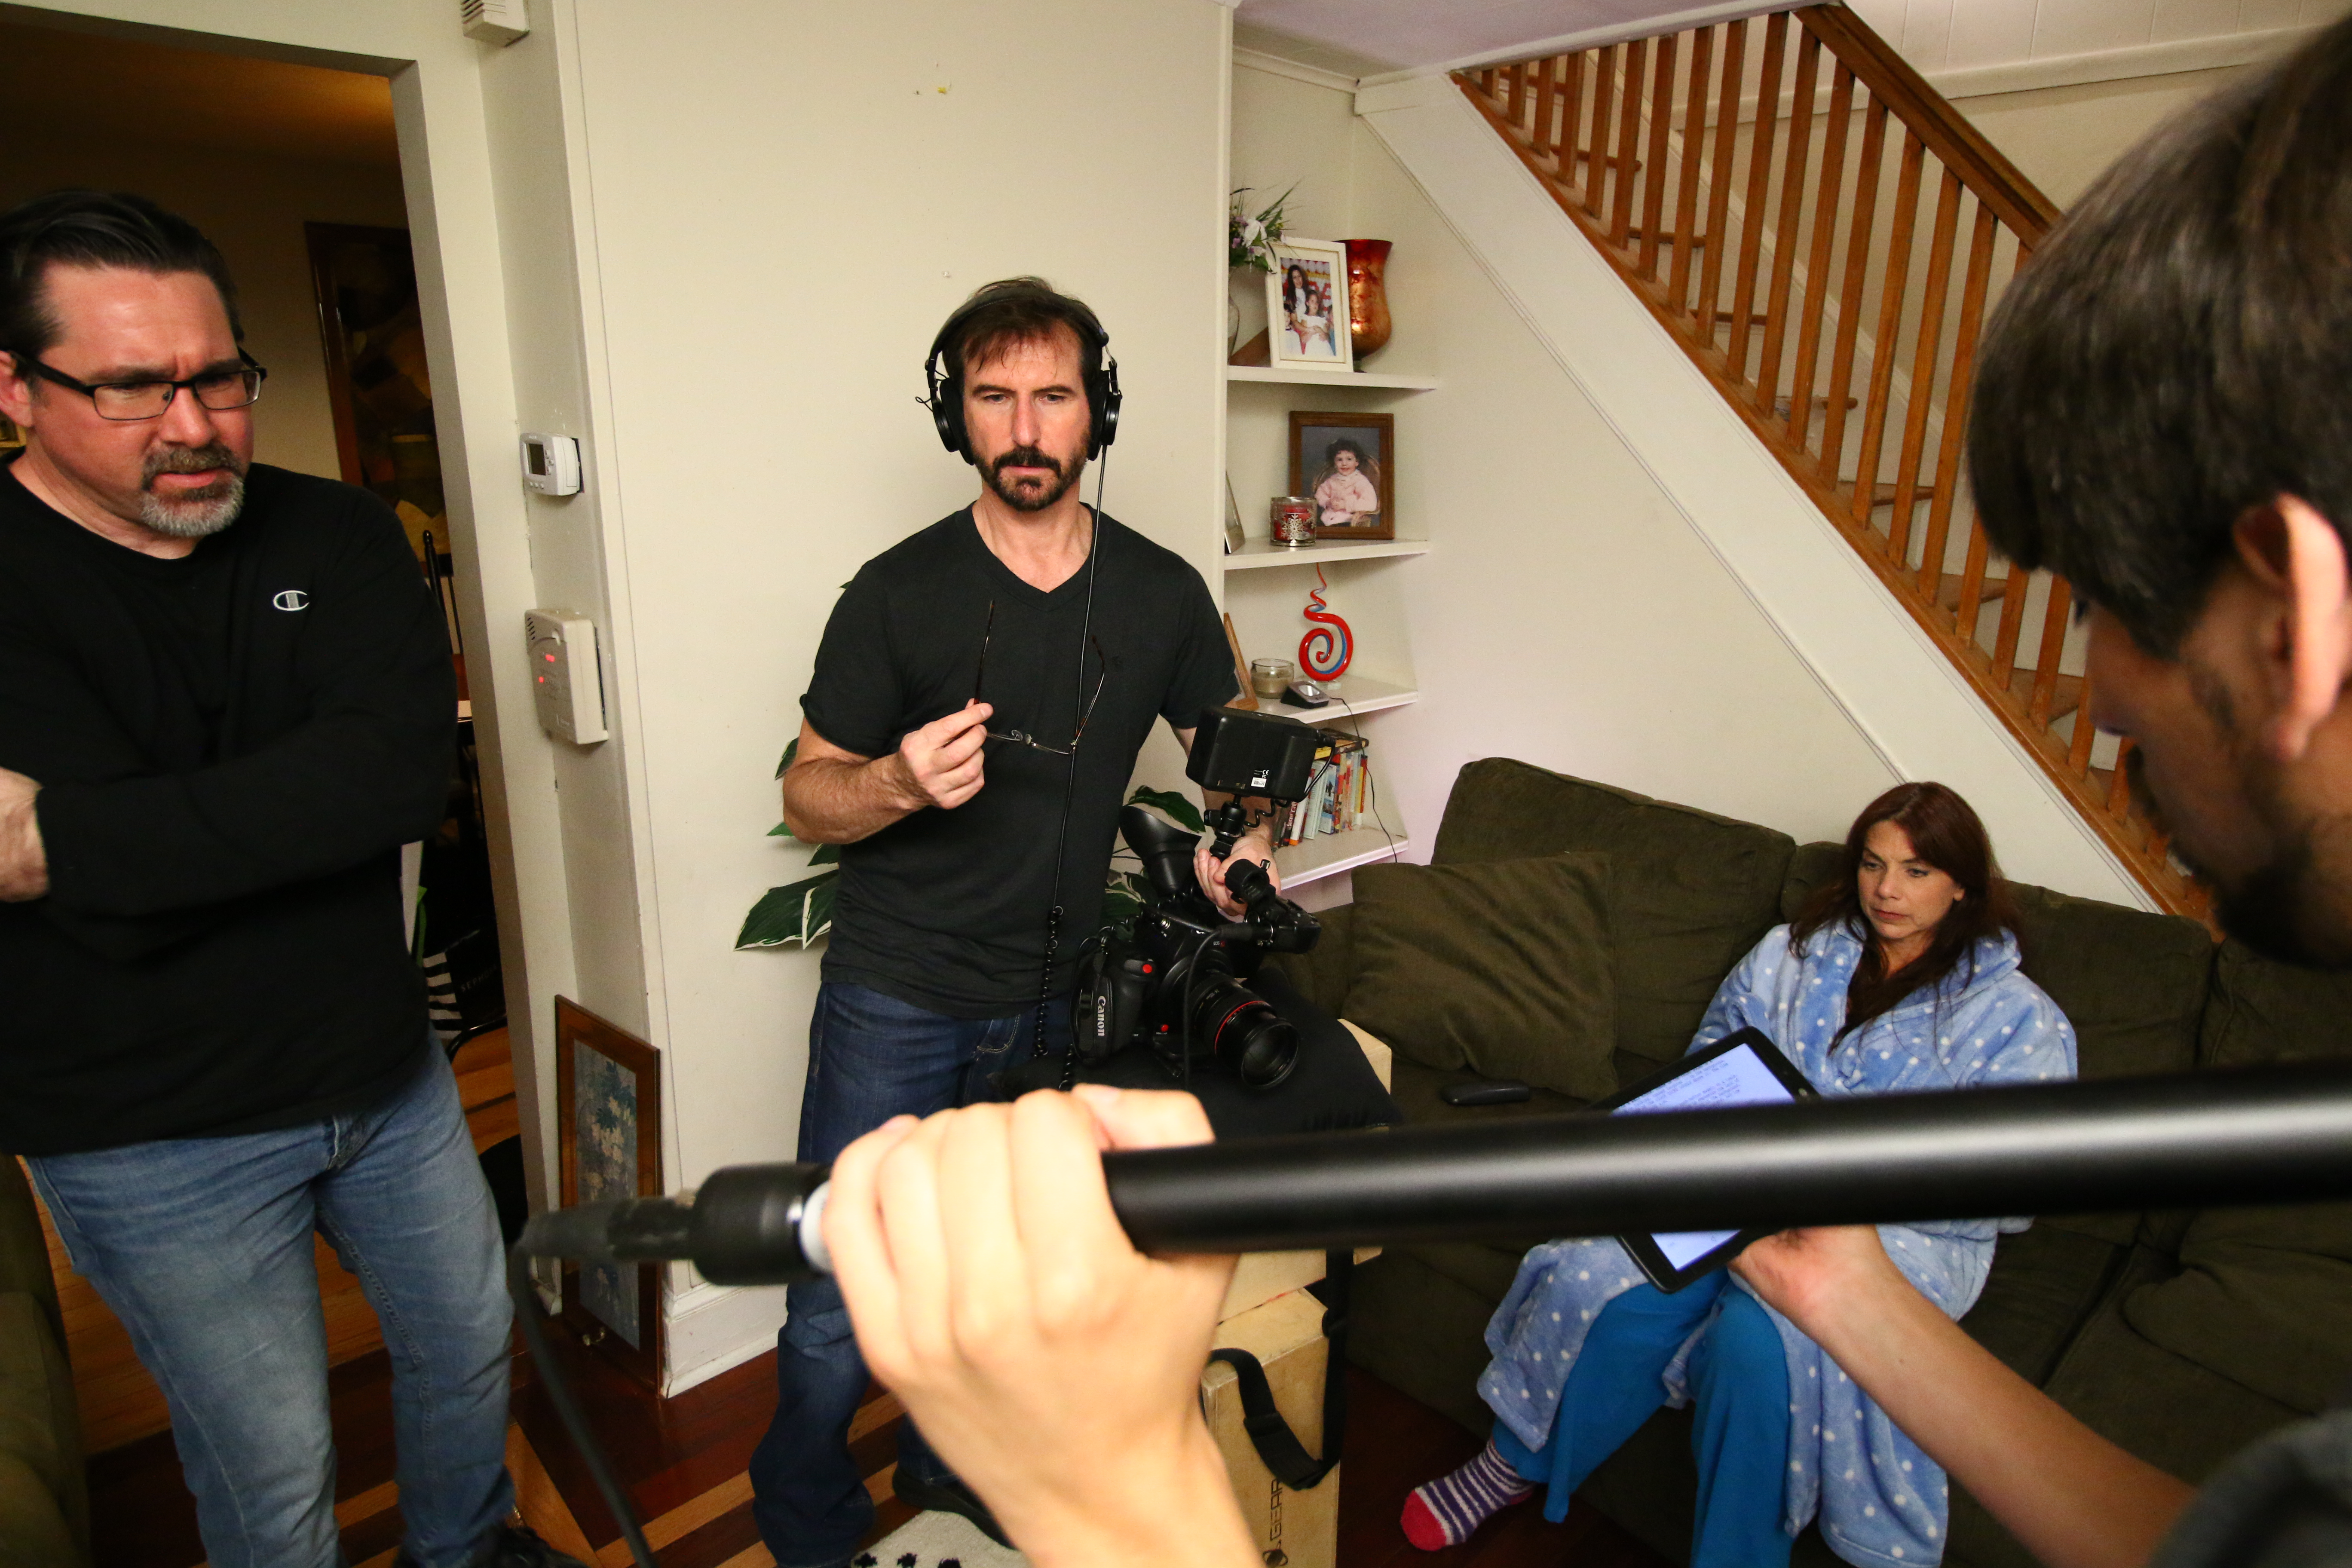 Working behind the scenes (left) as writer, director, and producer of Ditch, a micro-short thriller